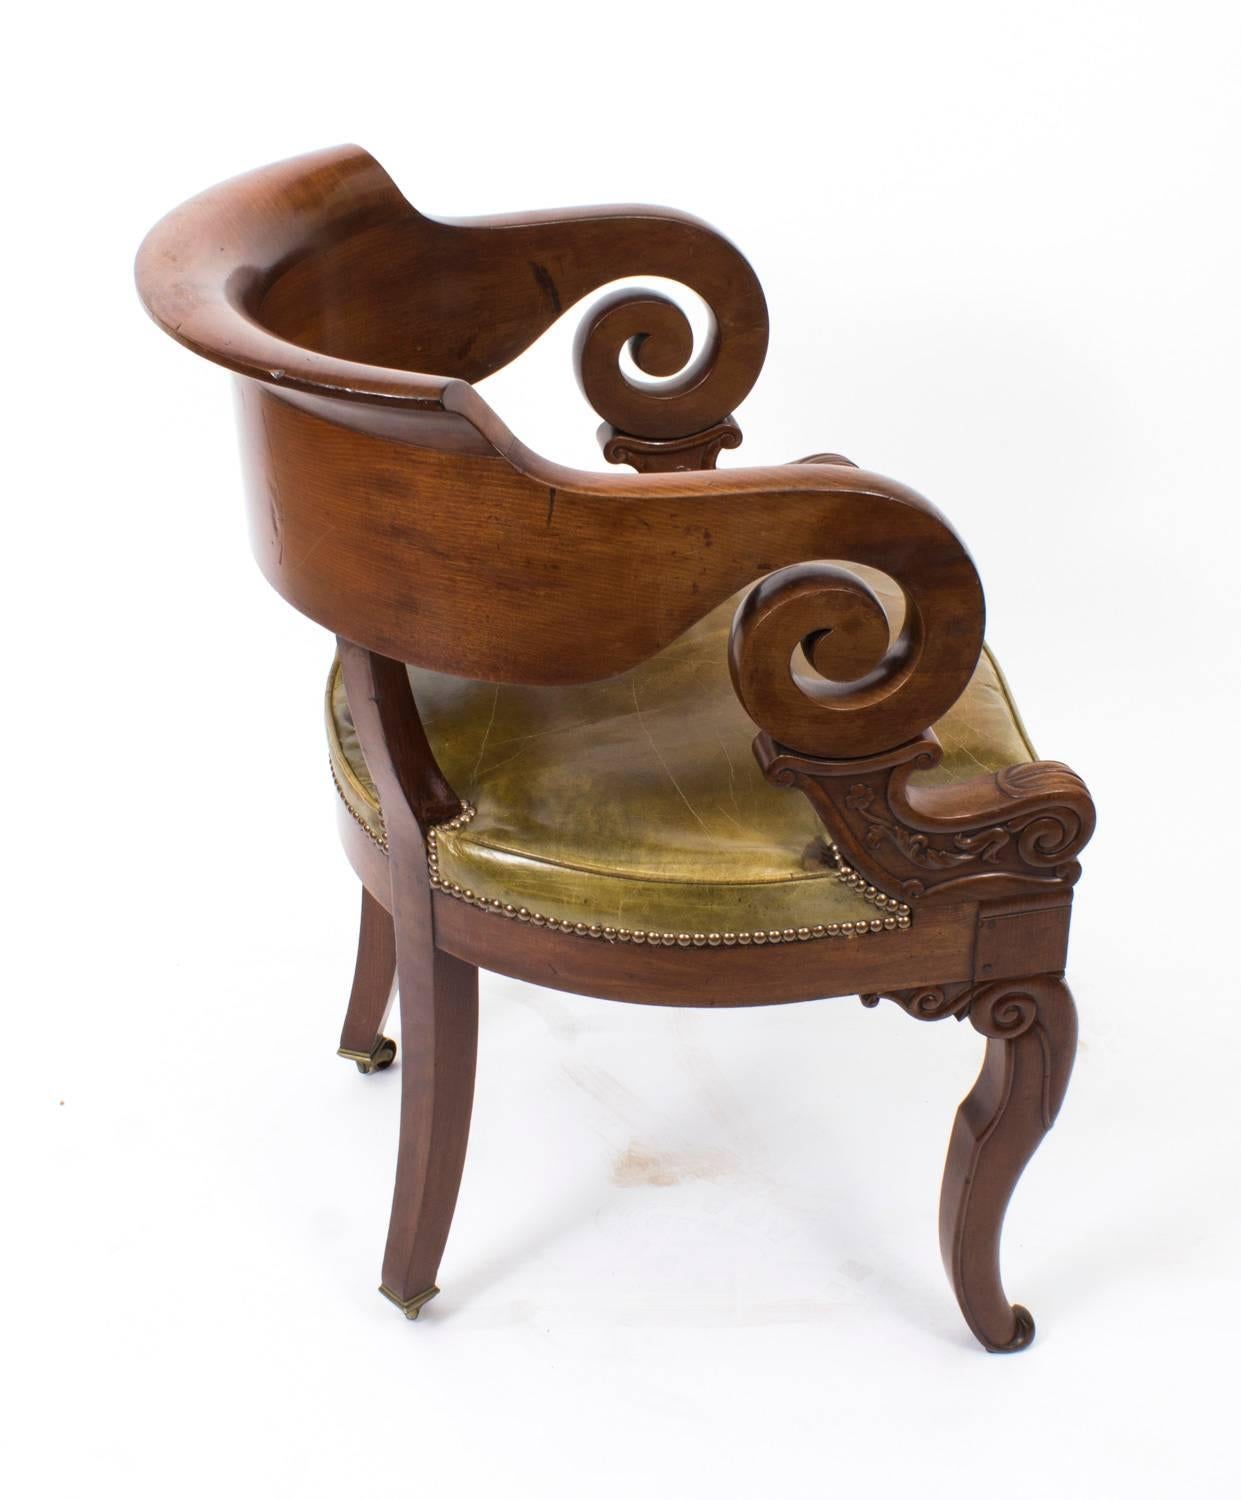 Early 19th Century Antique Empire Mahogany Armchair Desk Chair, 19th Century